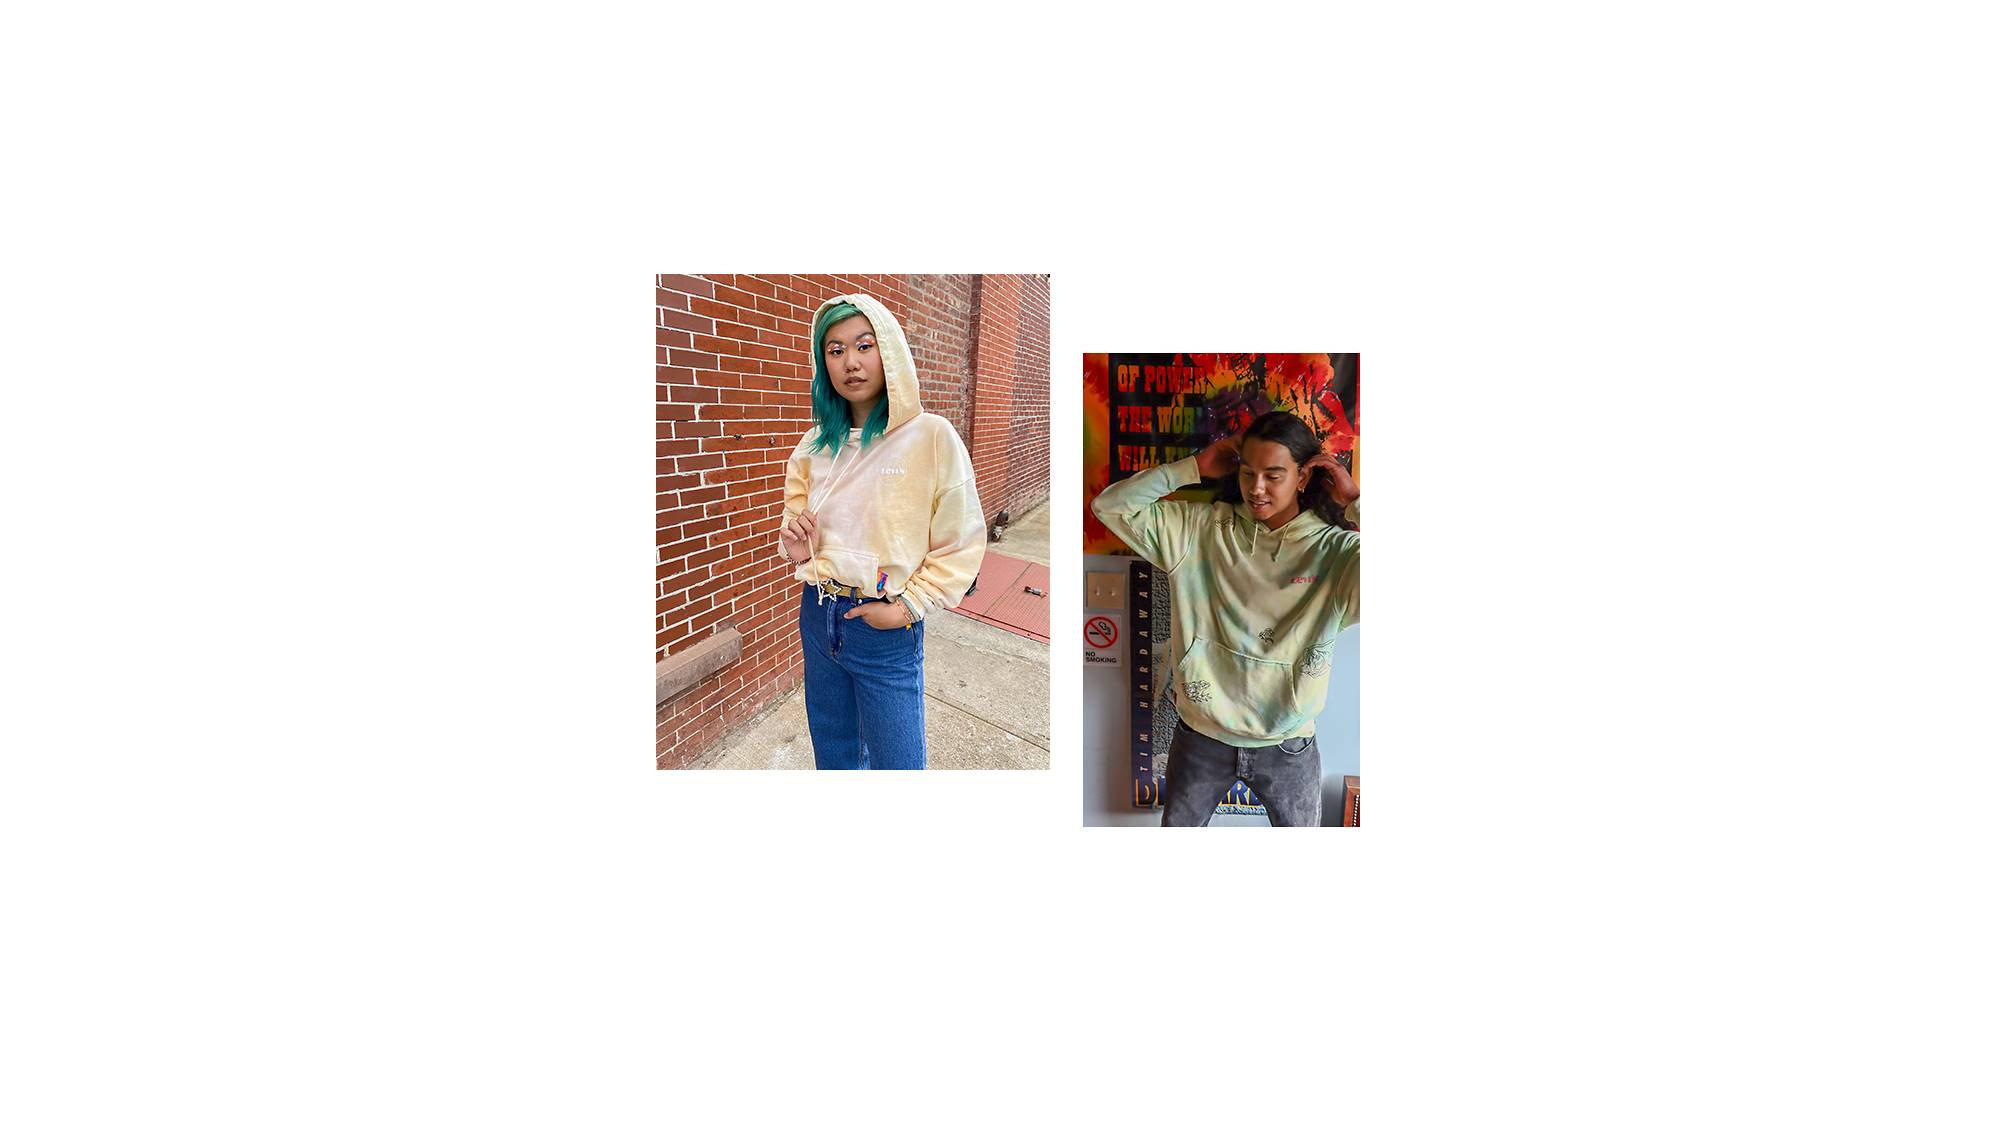 Two photos, the left photo is Mi-Anne wearing a light sweatshirt and Levi's jeans and the right shows Skip Jones wearing a a light tye dye sweatshirt and dark jeans